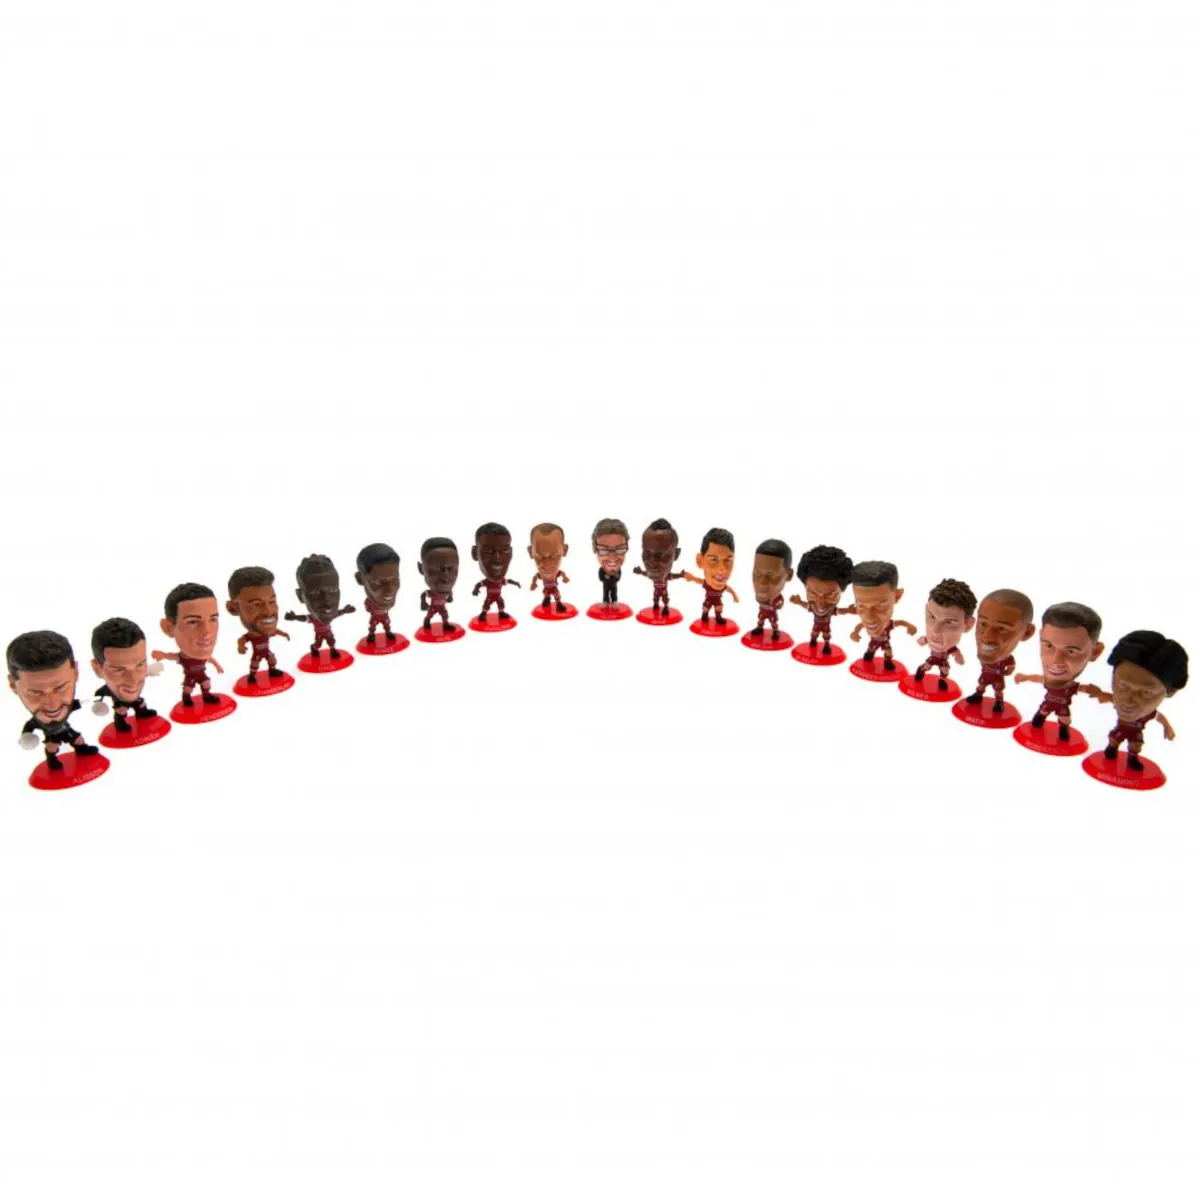 178840 Liverpool FC SoccerStarz 19 Player Team Pack 2020-21 Season Collectable Figures